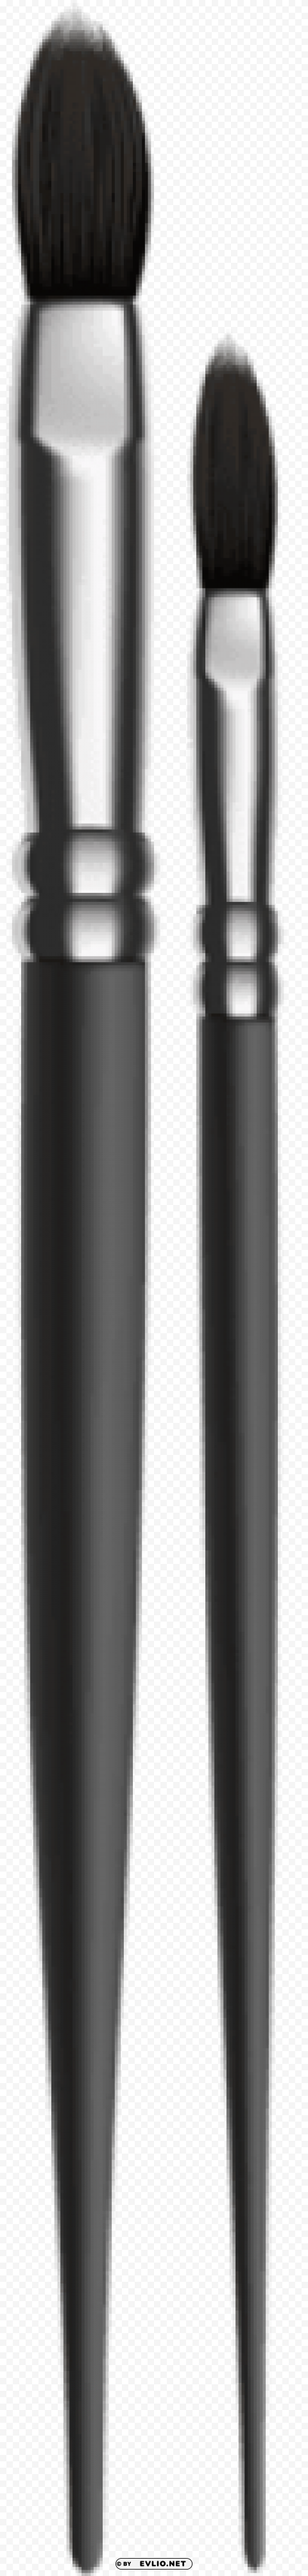 paint brushes PNG format